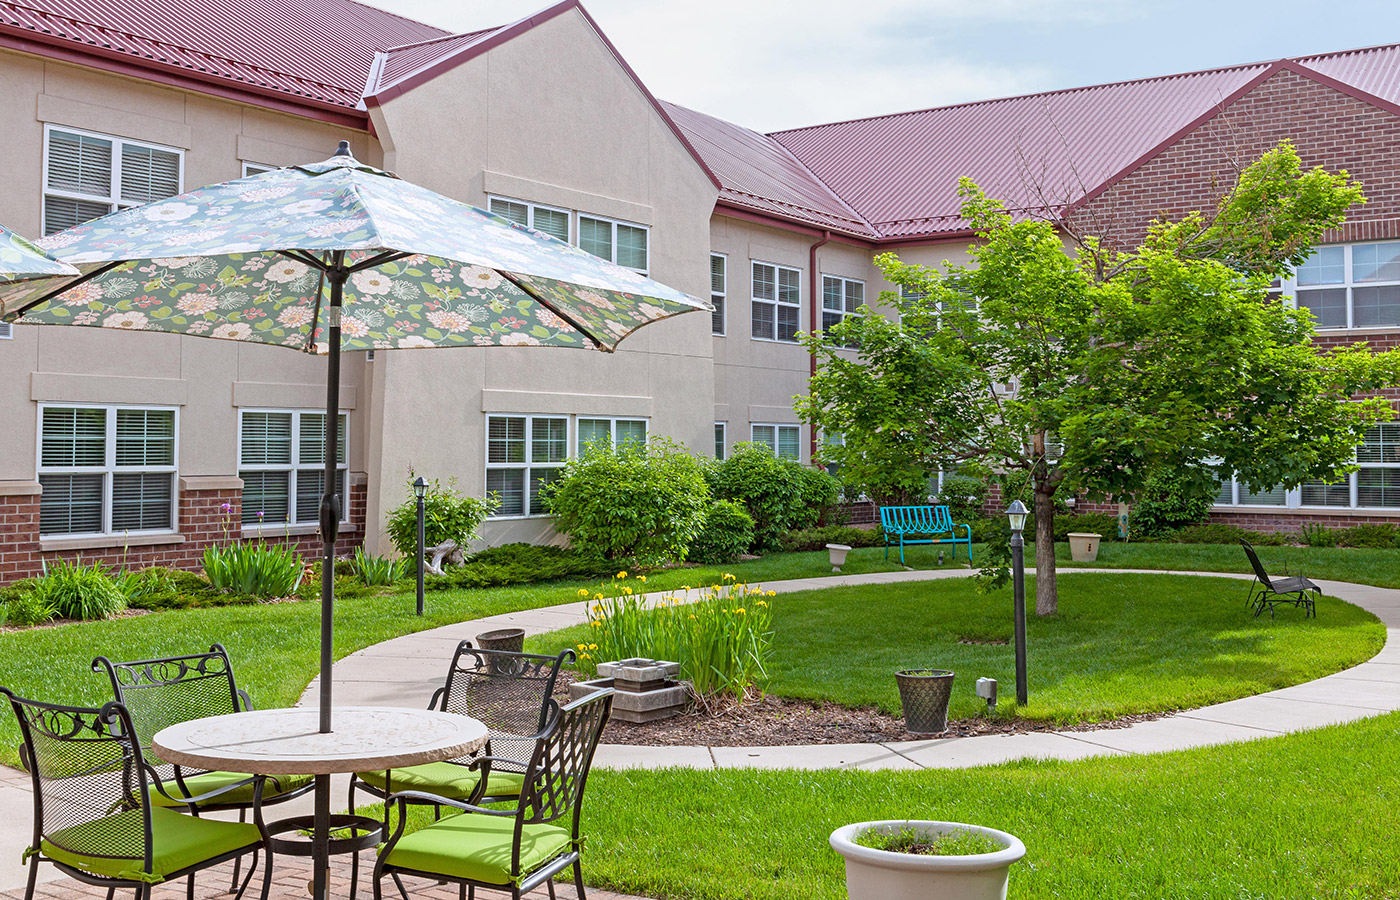 The patio at St. Andrews Village.